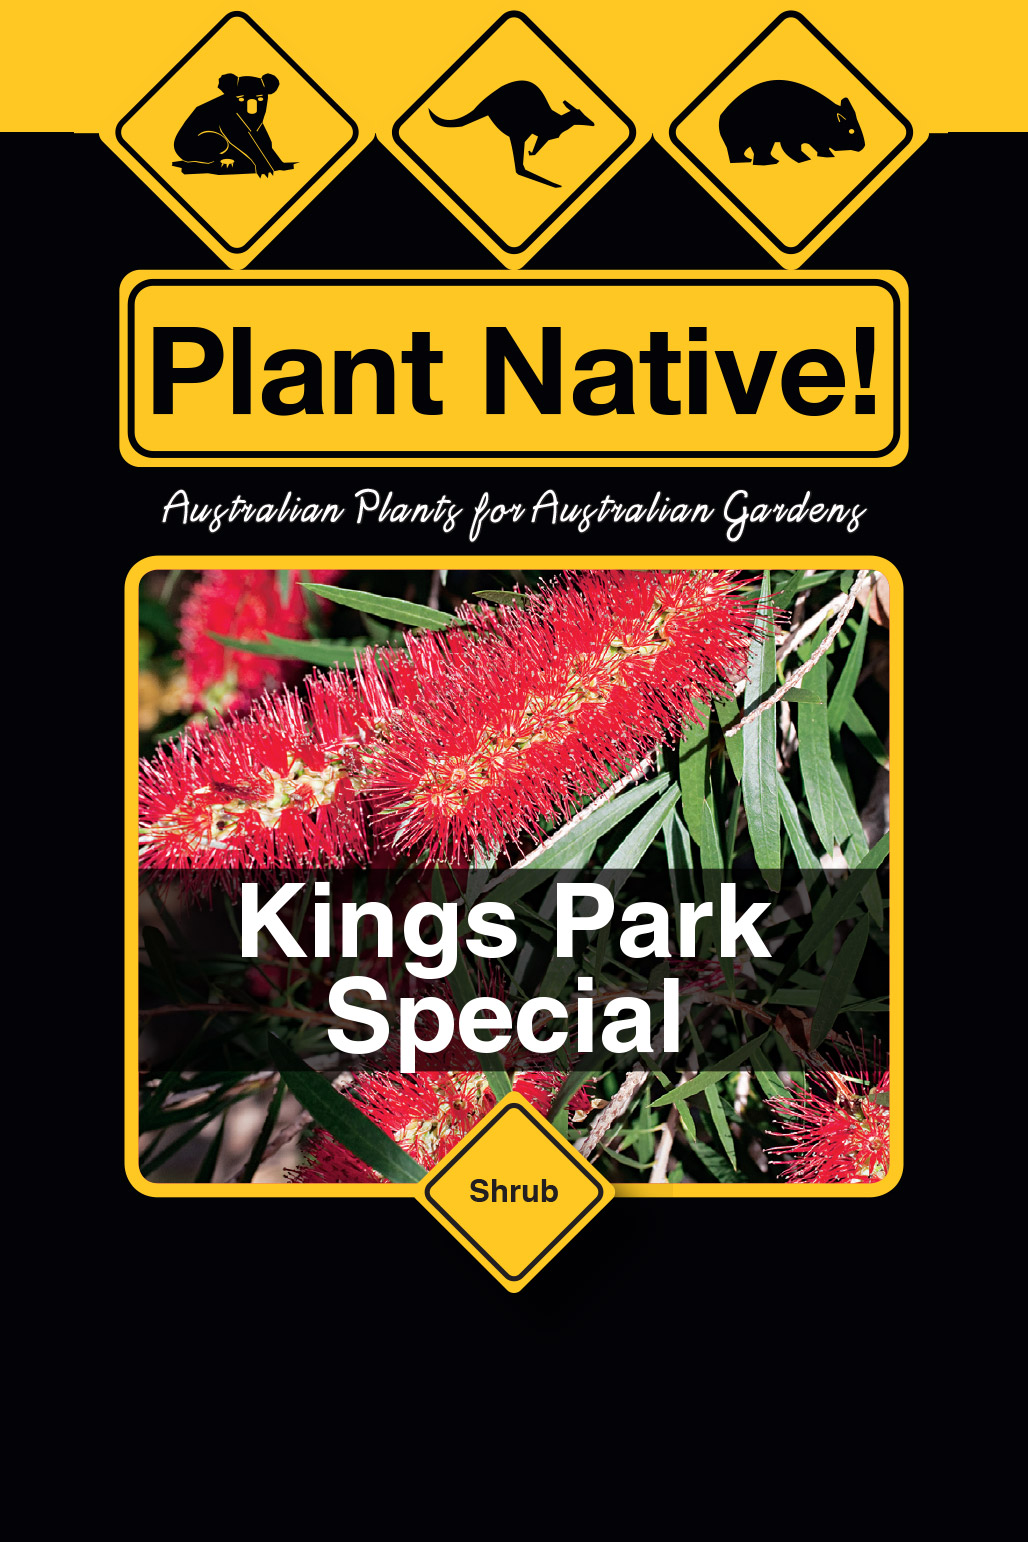 Kings Park Special - Plant Native!